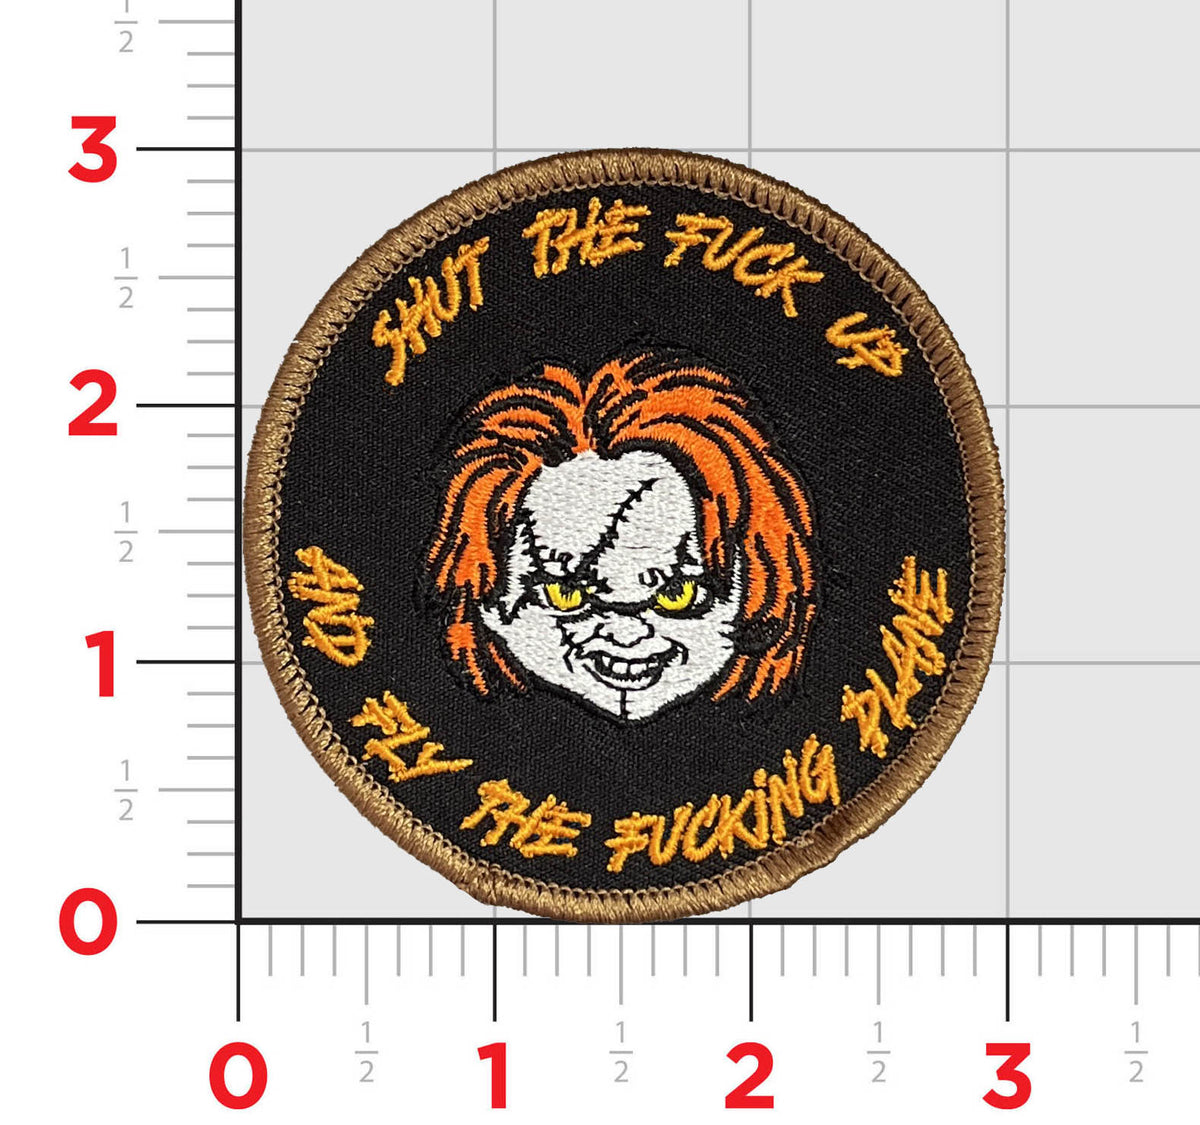 Military Patch FUCK AROUND AND FIND OUT patch [with hook